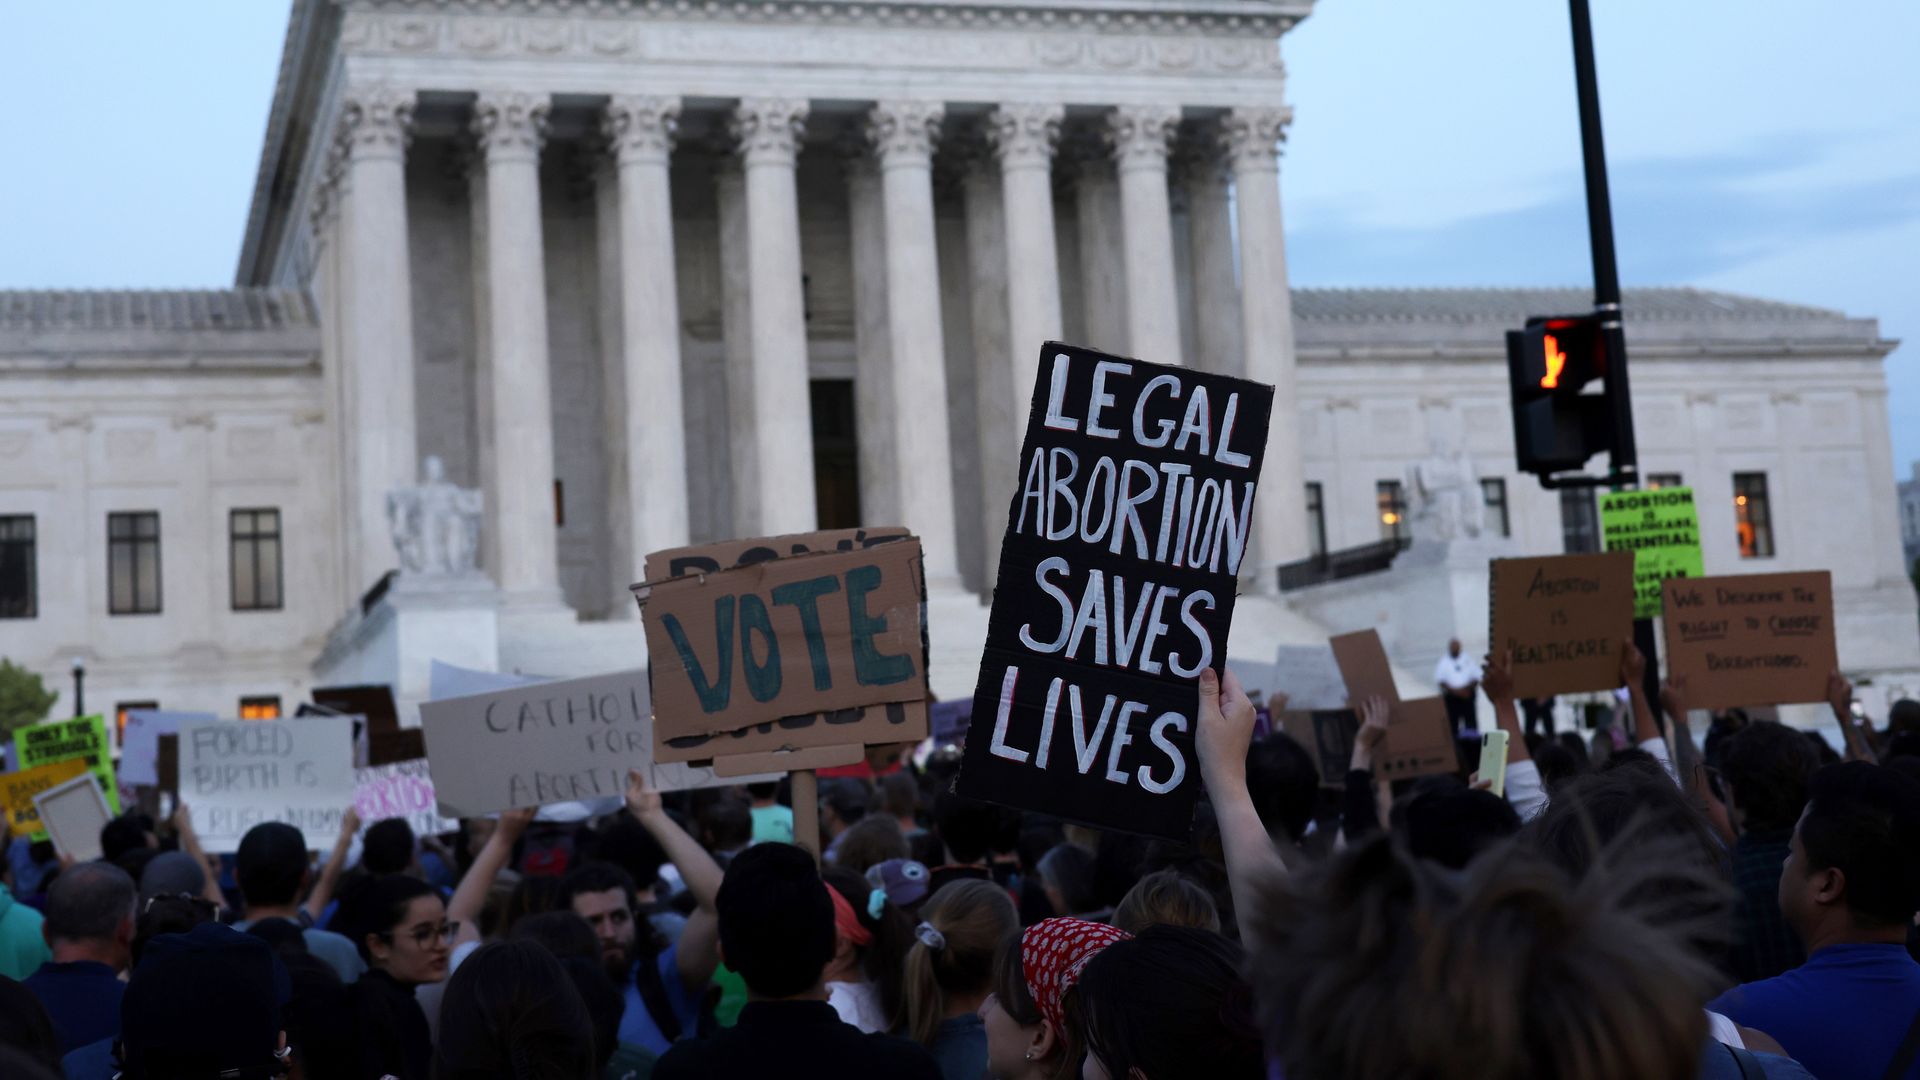  Pro-choice activists protest during a rally in front of the U.S. Supreme Court in response to the leaked Supreme Court draft decision to overturn Roe v. Wade May 3, 2022 in Washington, DC